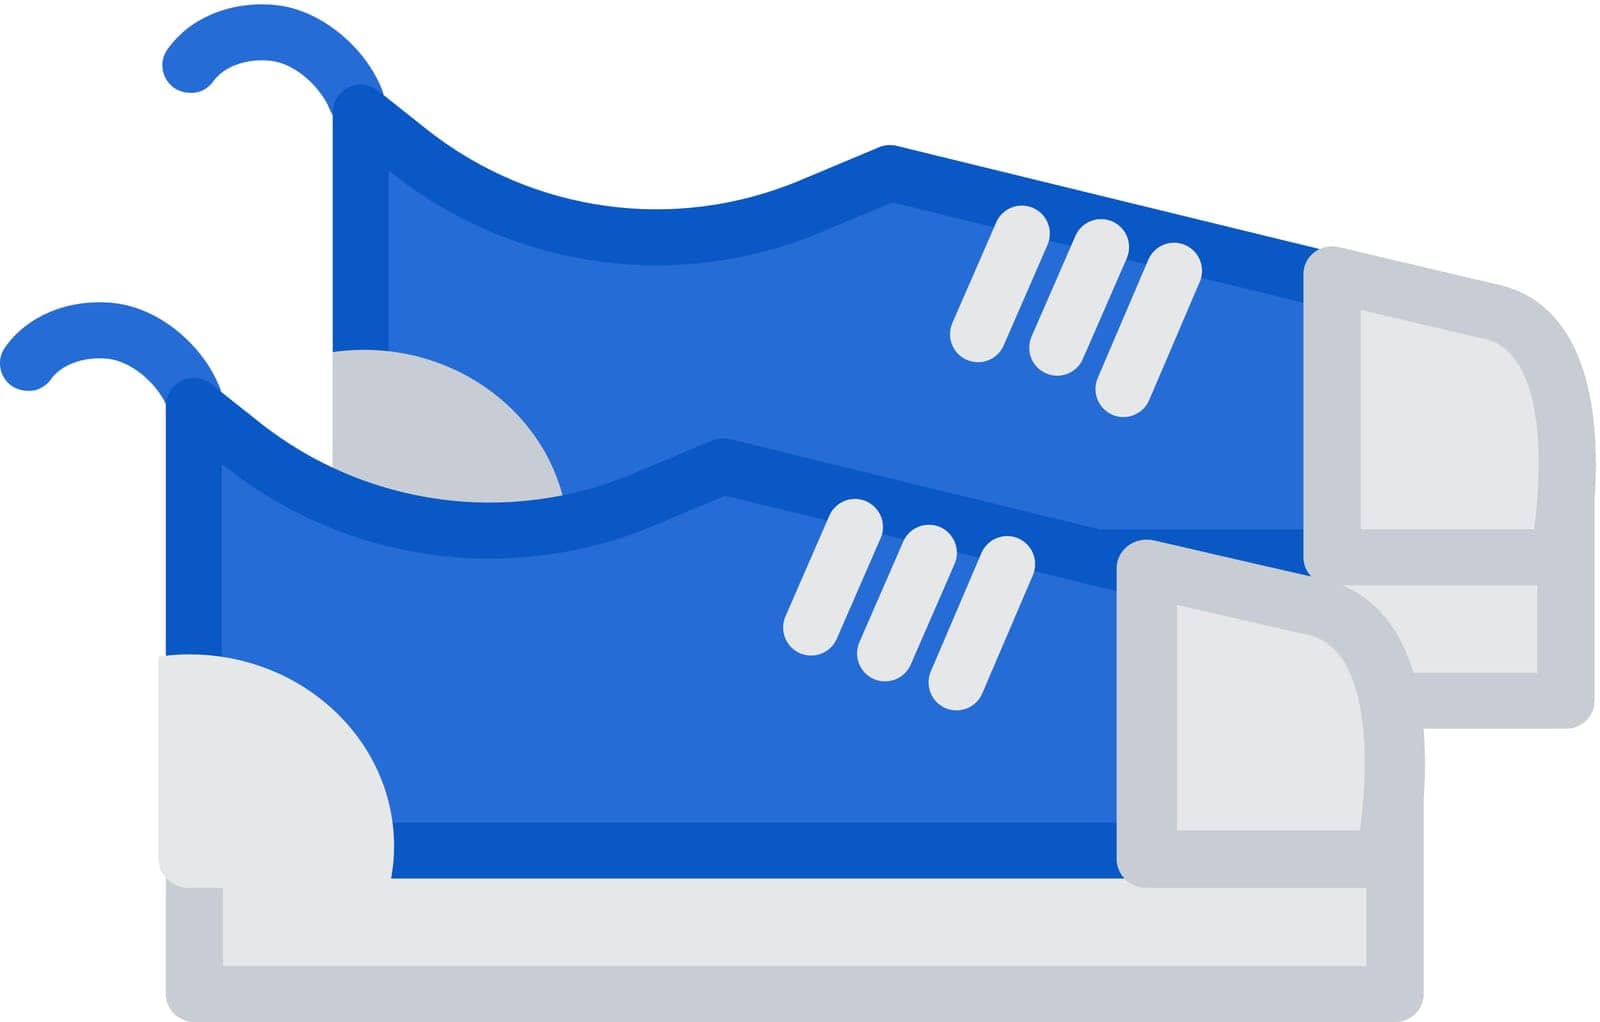 Sneaker sportive shoe for athlete icon vector by barsrsind